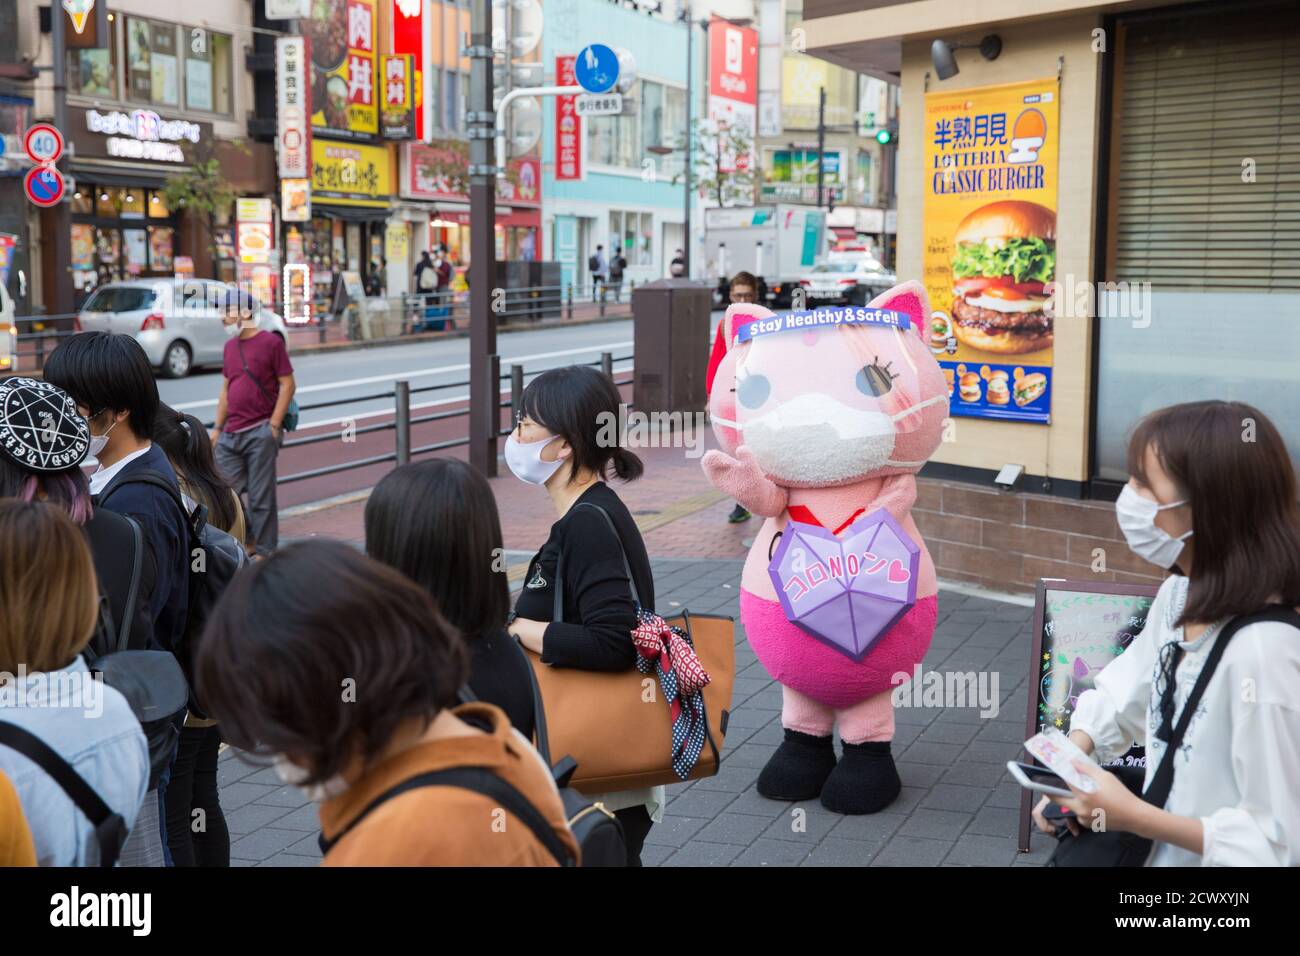 Koronon, a Japanese anti-coronavirus cat mascot waves at pedestrians wearing masks in Ikebukuro, Tokyo.Koronon, a Japanese anti-coronavirus cat mascot who hands out disposable face masks and raises awareness about the coronavirus (Covid-19) waves at pedestrians in Ikebukuro, Tokyo. Koronon can also be booked to visit schools and companies to share its message about hygiene and other measures to fight Covid-19. Stock Photo